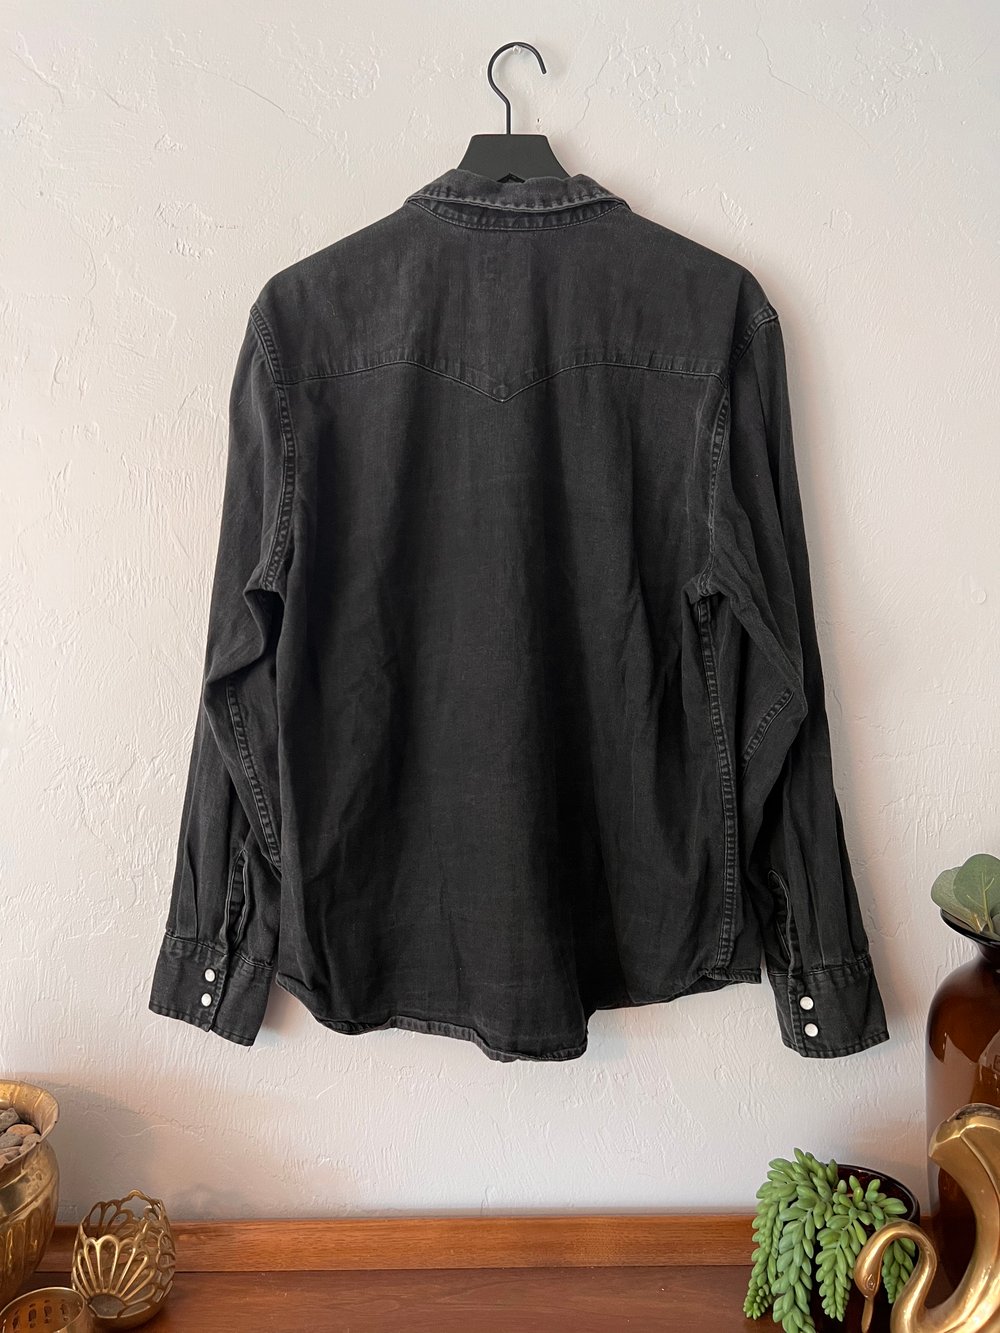 Levi’s Black Pearl Snap Button Up (XL)